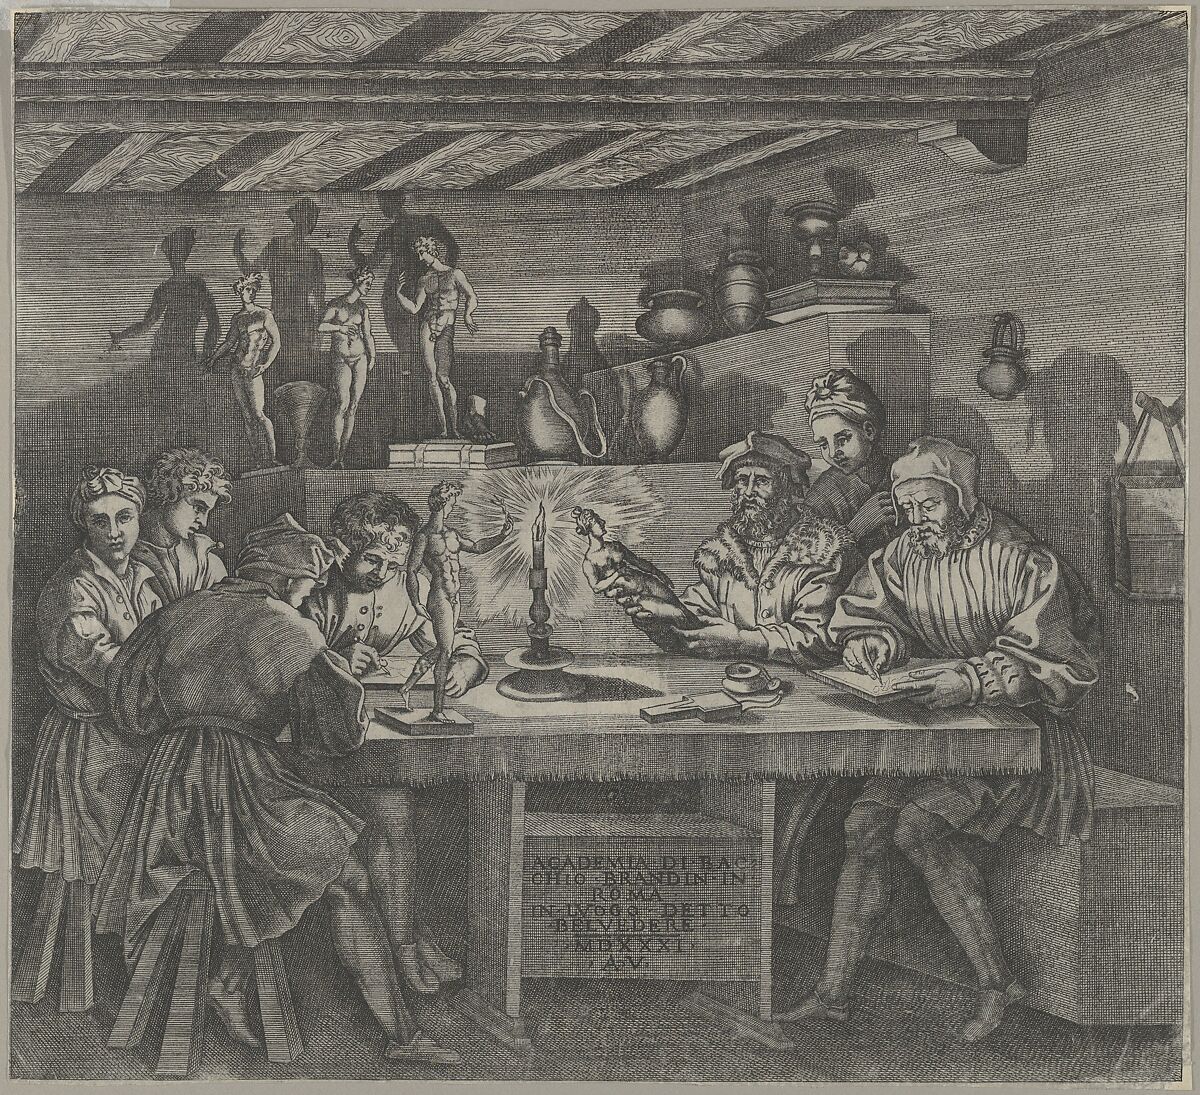 Baccio Bandinelli in his studio holding a statuette of Venus, students sketching from a model by candlelight, Agostino Veneziano (Agostino dei Musi) (Italian, Venice ca. 1490–after 1536 Rome), Engraving 